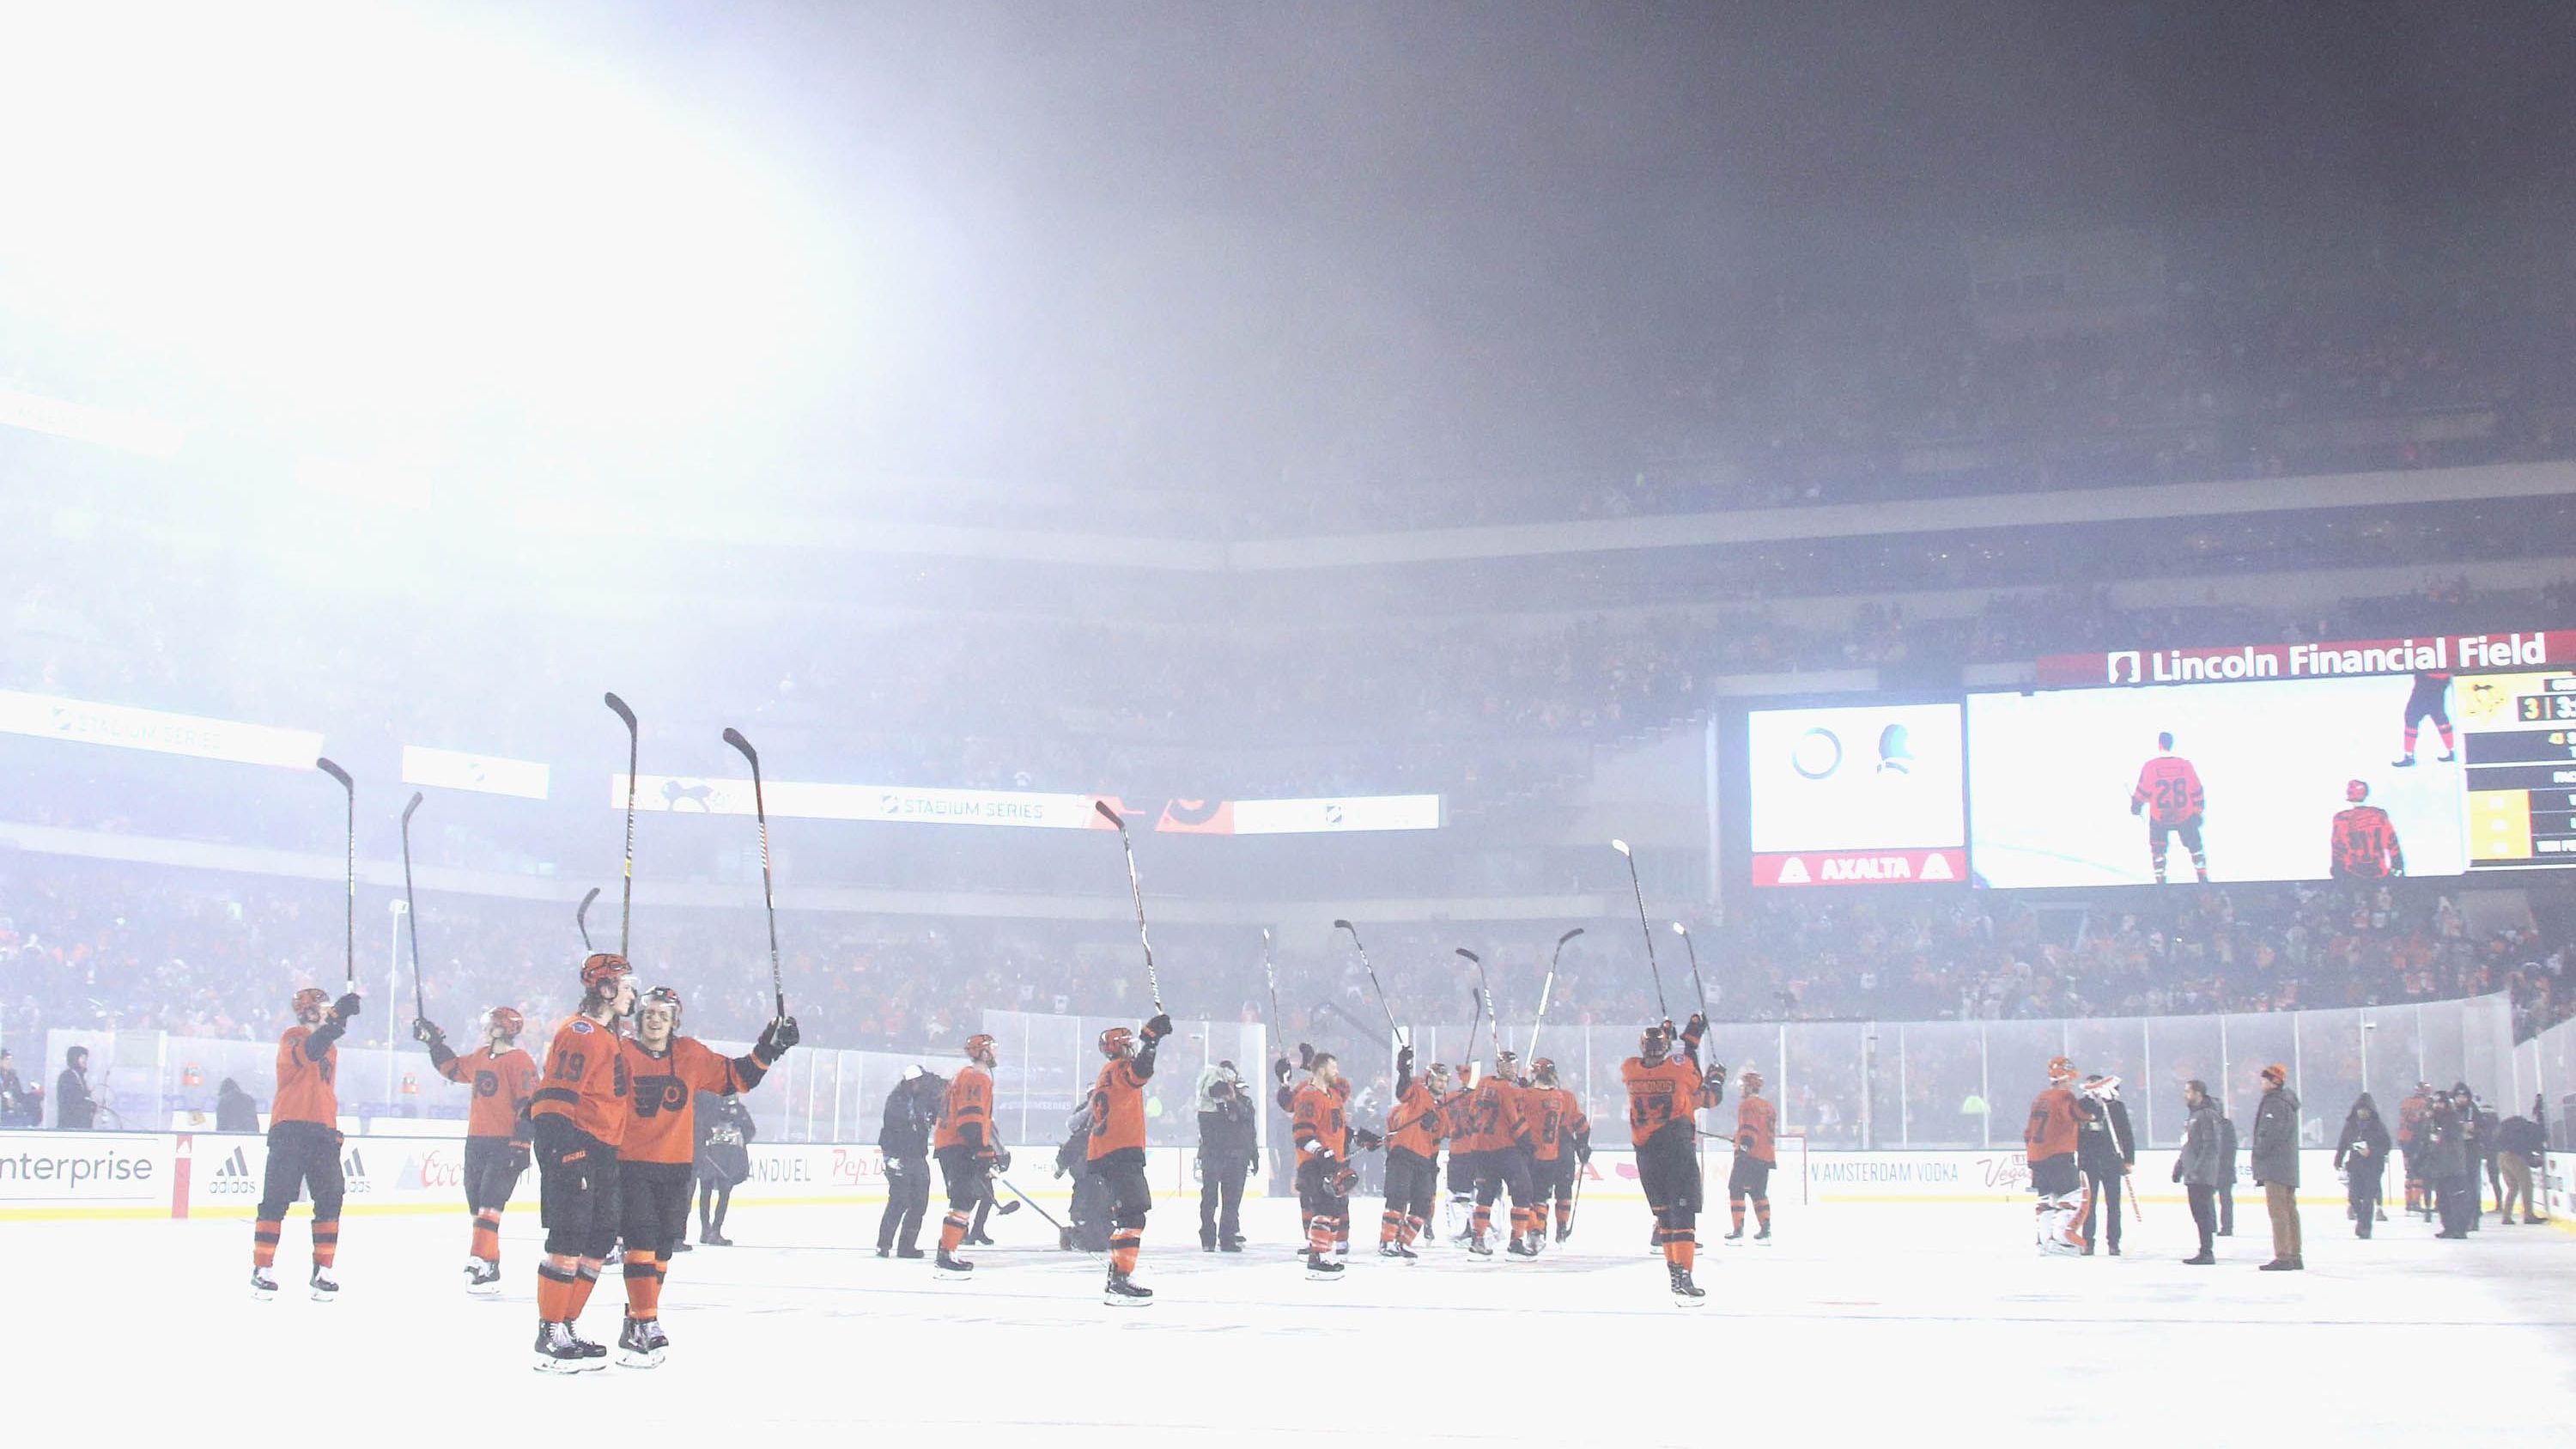 <strong>Platz 9: NHL Stadium Series 2019</strong><br><strong>Zuschauer:</strong> 69.620<br><strong>Begegnung:</strong> Philadelphia Flyers - Pittsburgh Penguins 4:3<br><strong>Stadion:</strong> Lincoln Financial Field, Philadelphia<br><strong>Datum:</strong> 23.02.2019